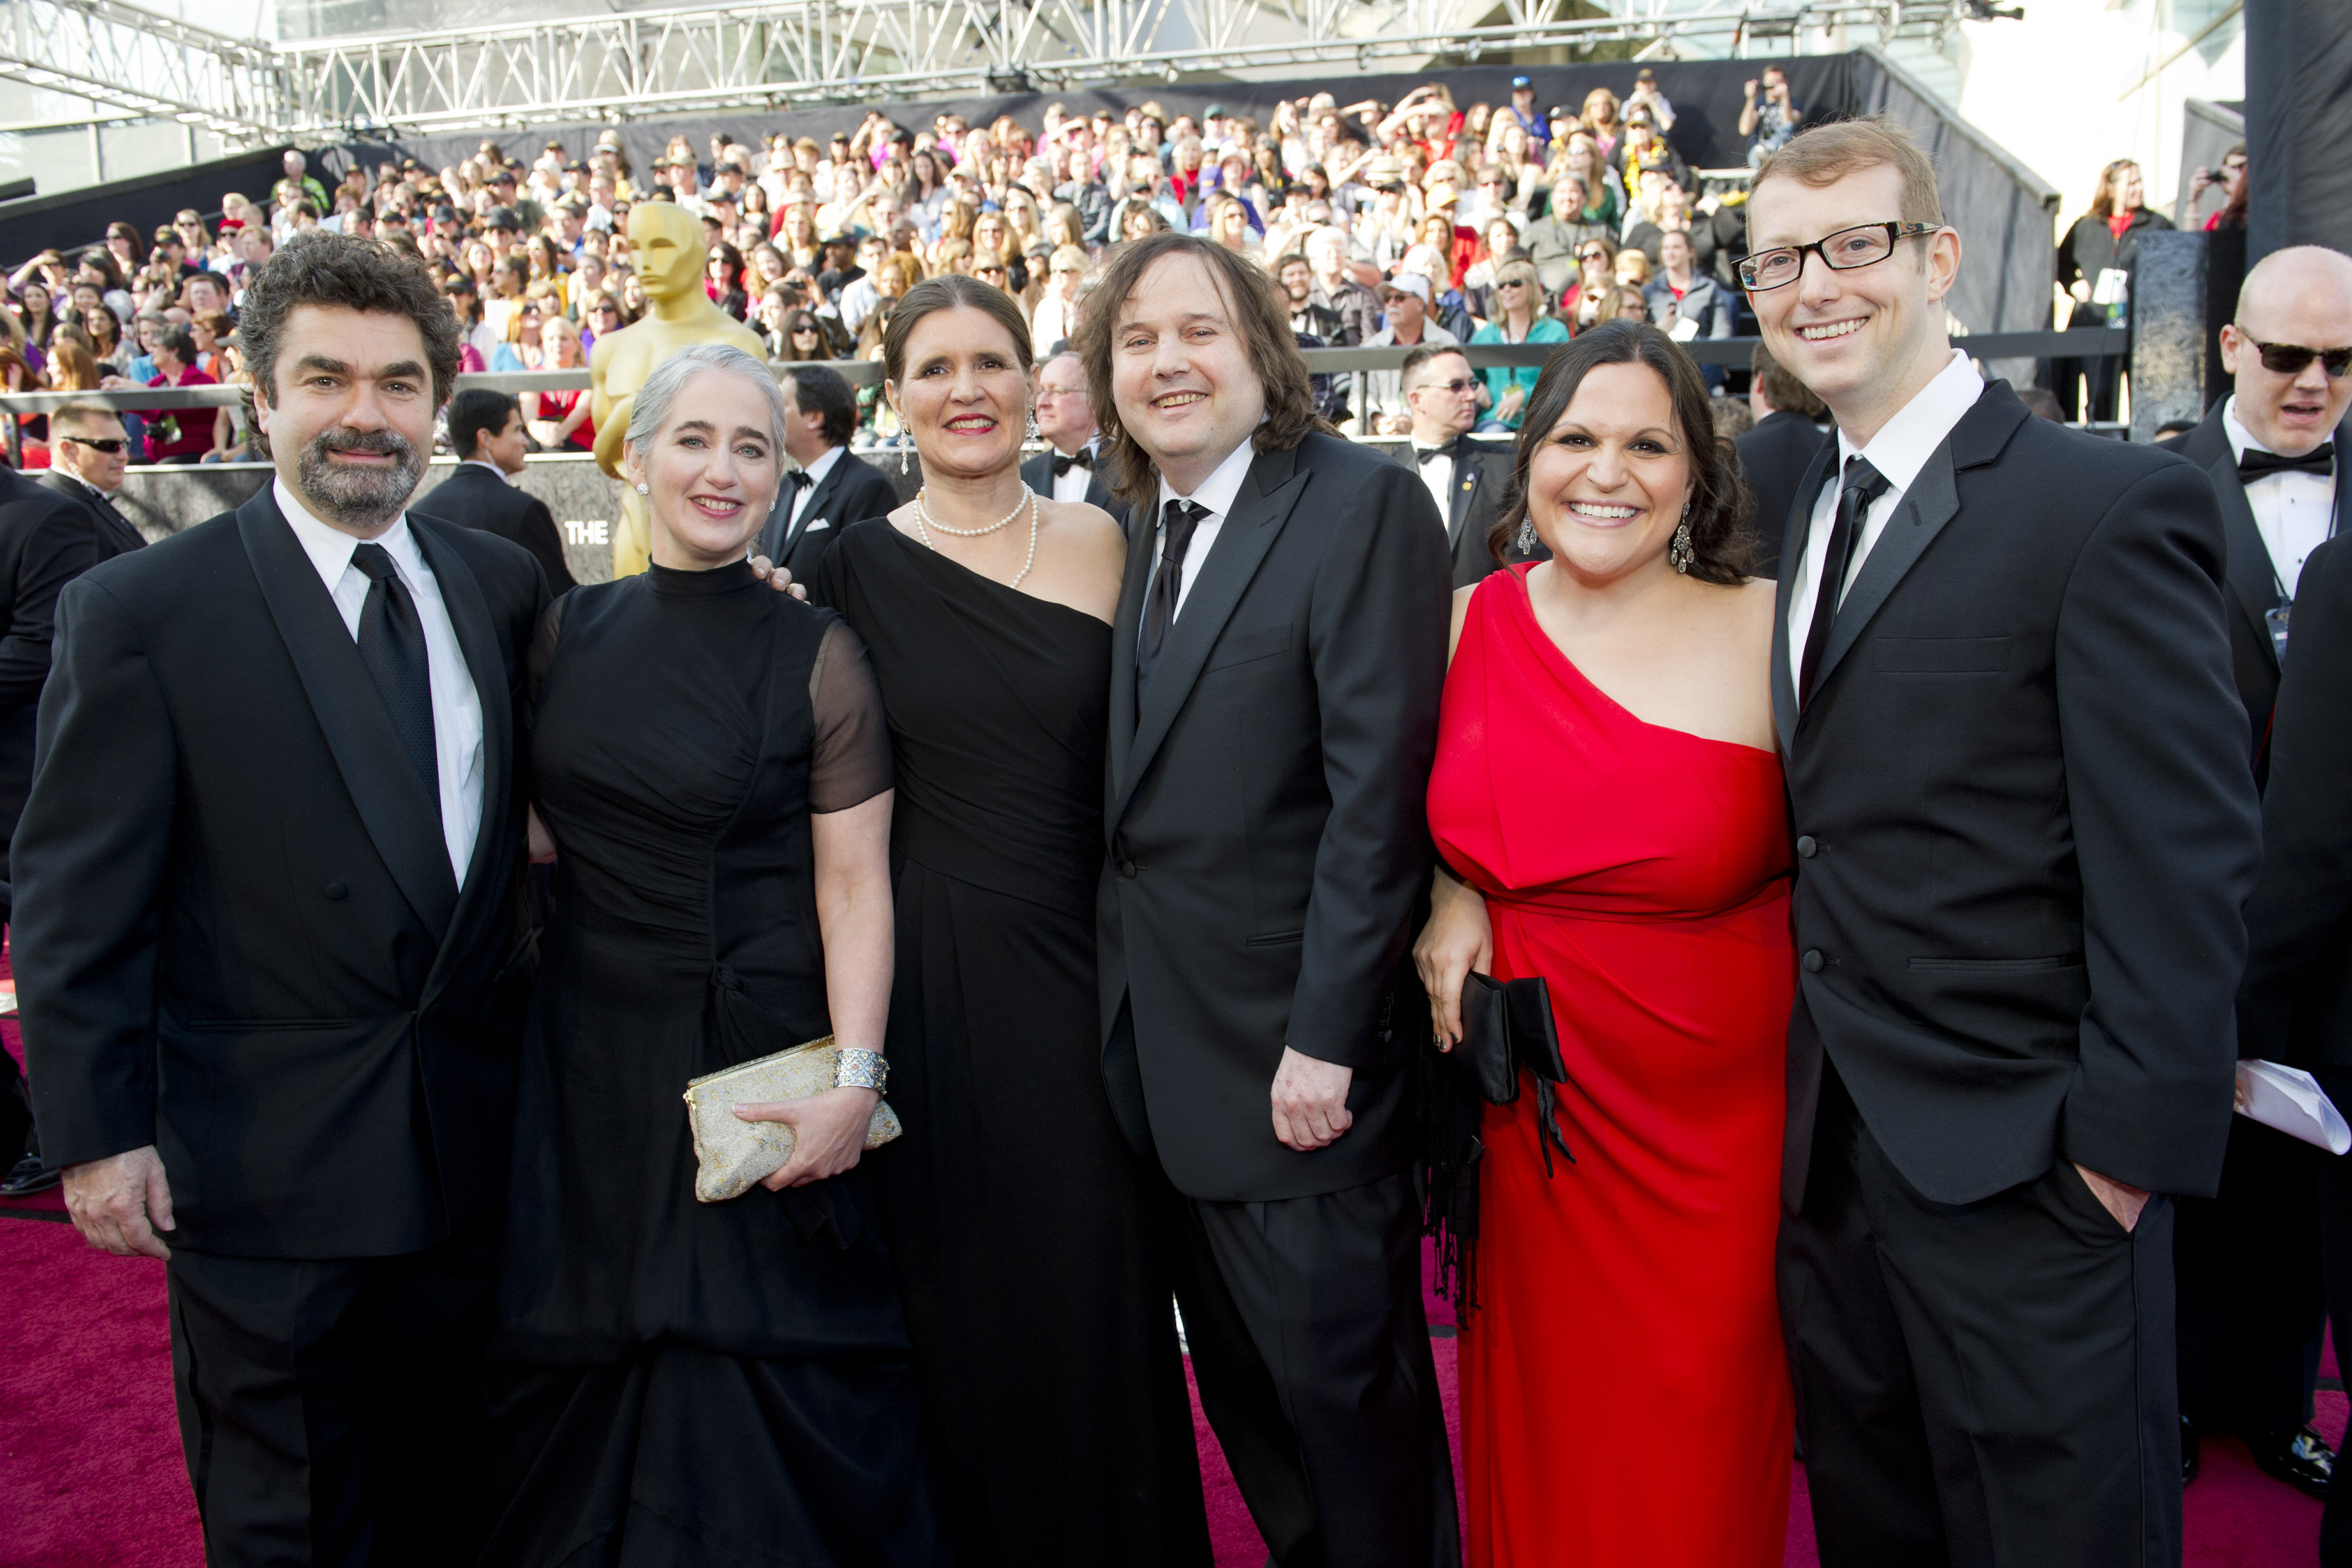 Joe Berlinger and Bruce Sinofsky, the Paradise Lost Trilogy filmmakers, attend the 2012 Academy Awards with their wives and Jason Baldwin, one of the three freed West Memphis Three.